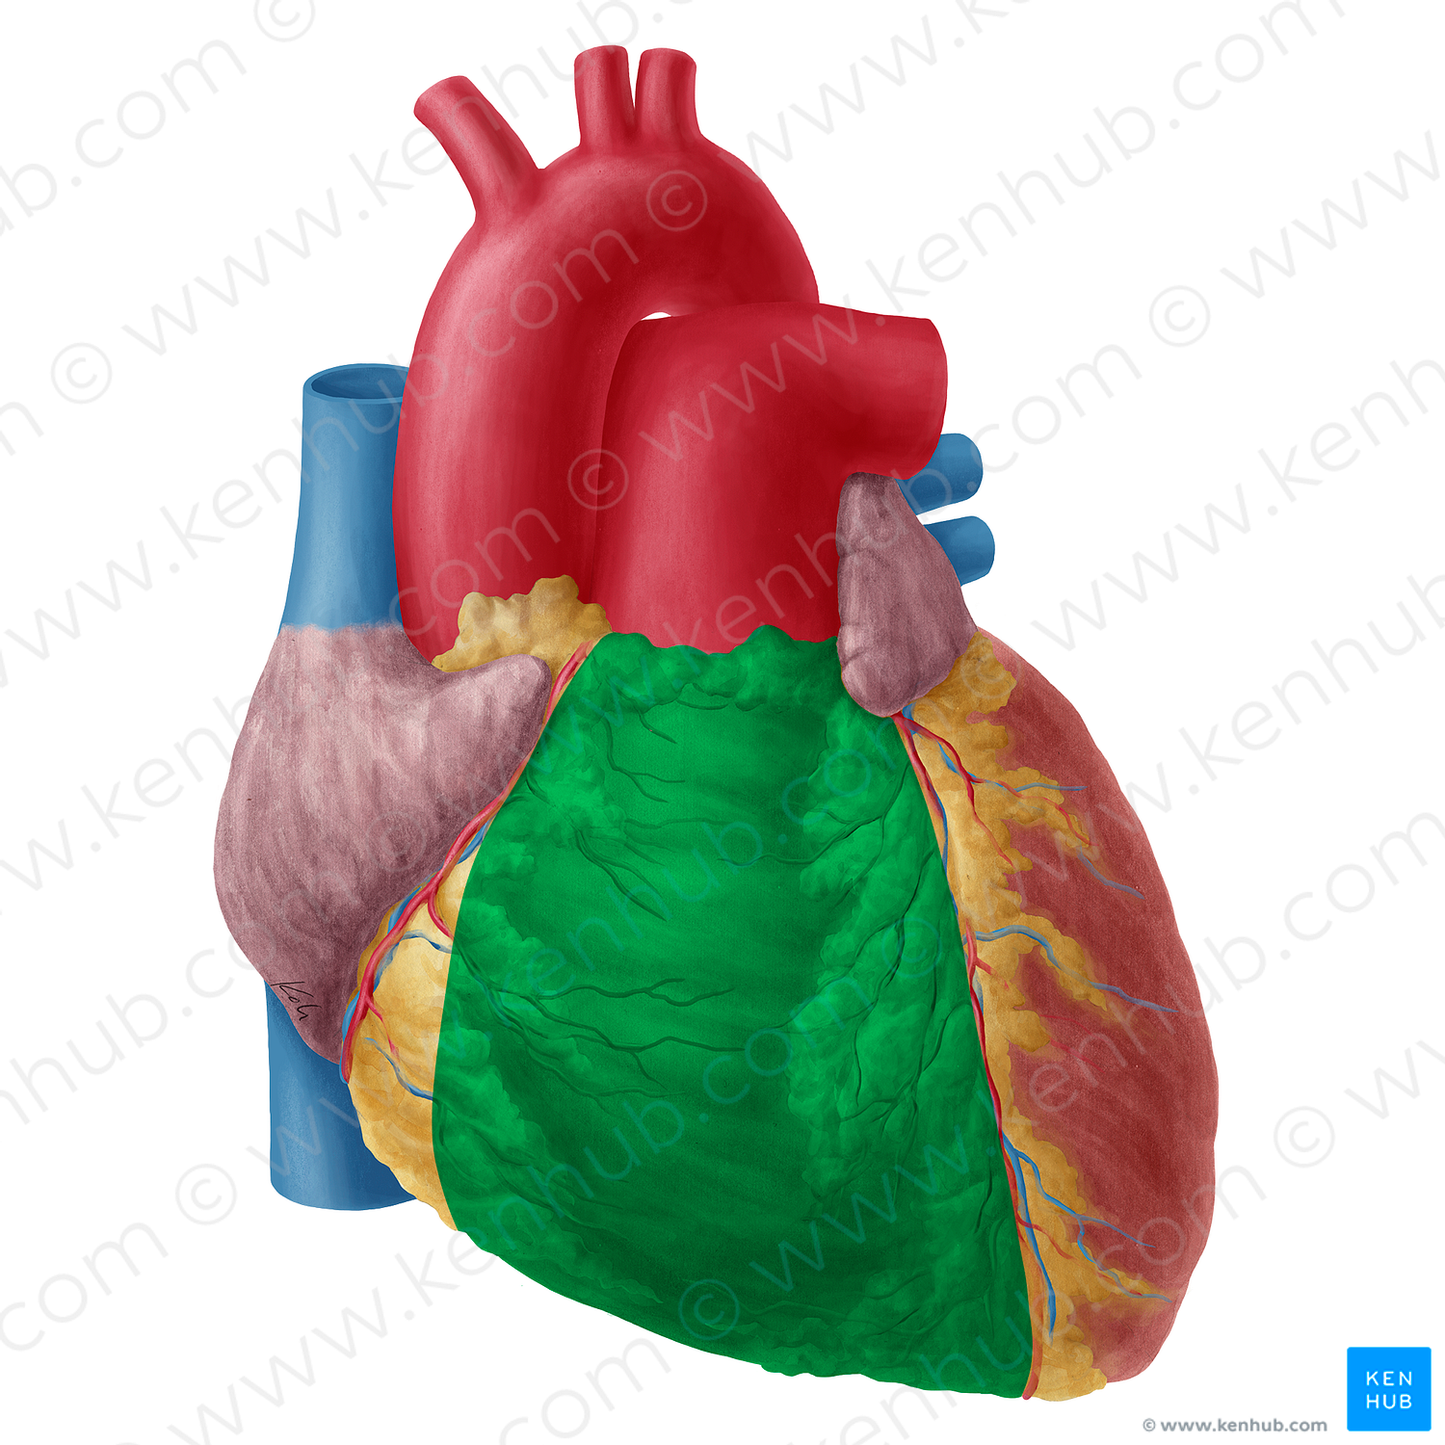 Right ventricle of heart (#19742)